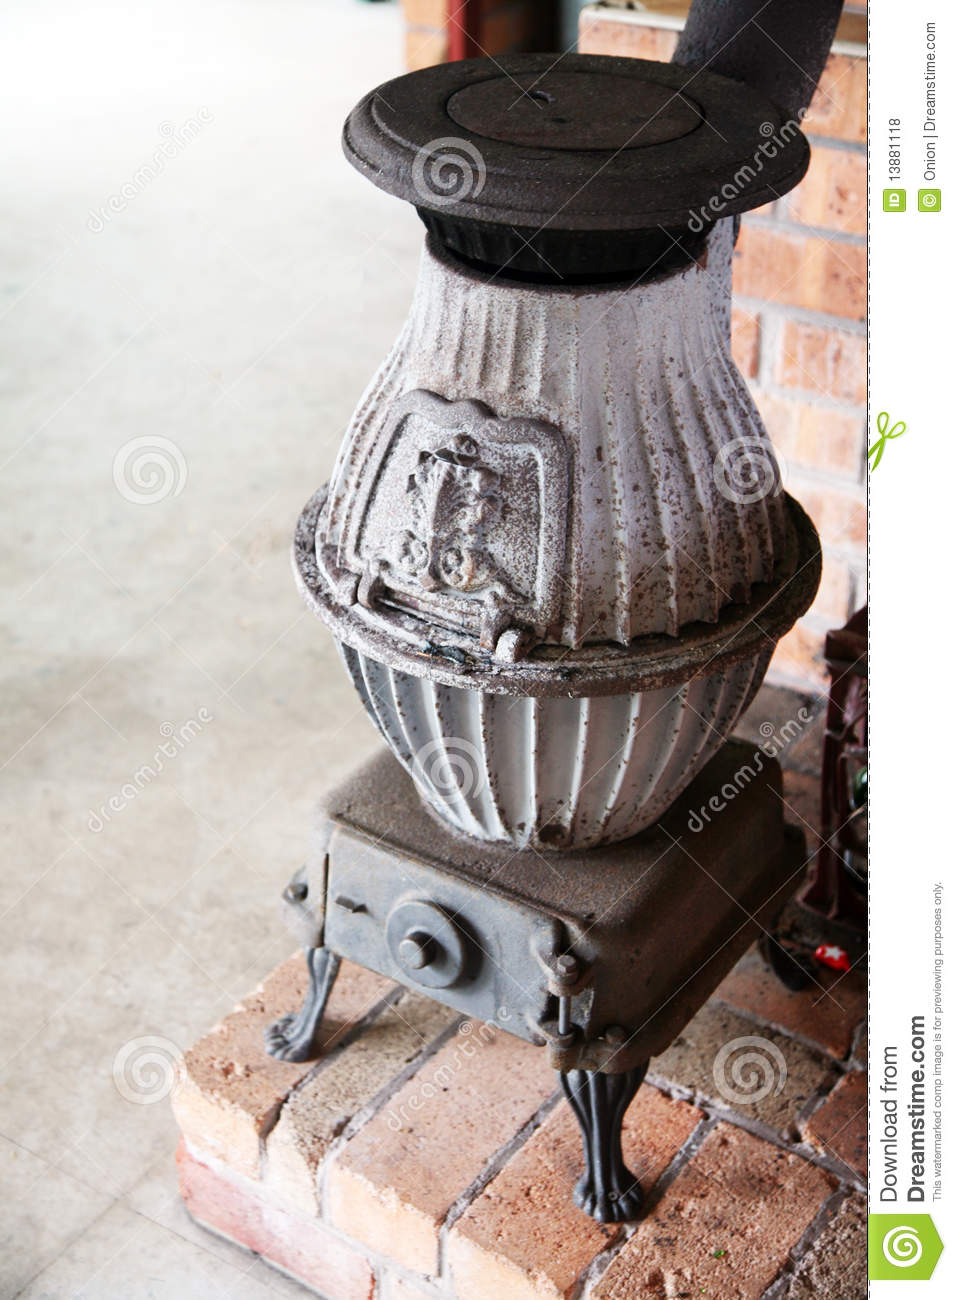 Traditional Wood Fire Stove Royalty Free Stock Photos   Image